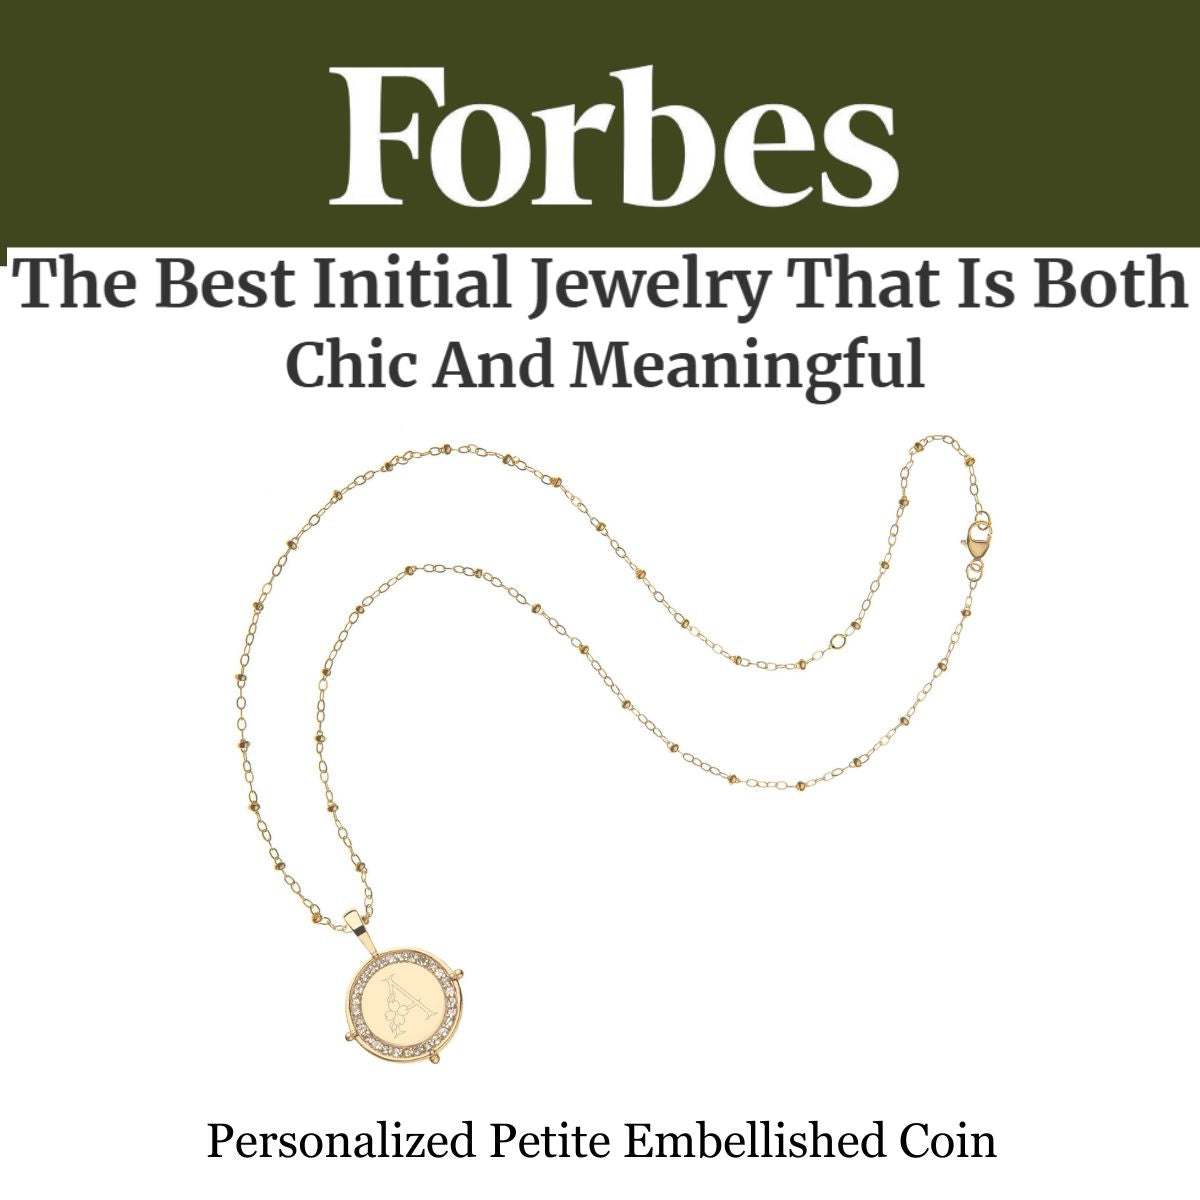 Press Highlight: Jane Win featured in Forbes "The Best Initial Jewelry That is Both Chic and Meaningful"